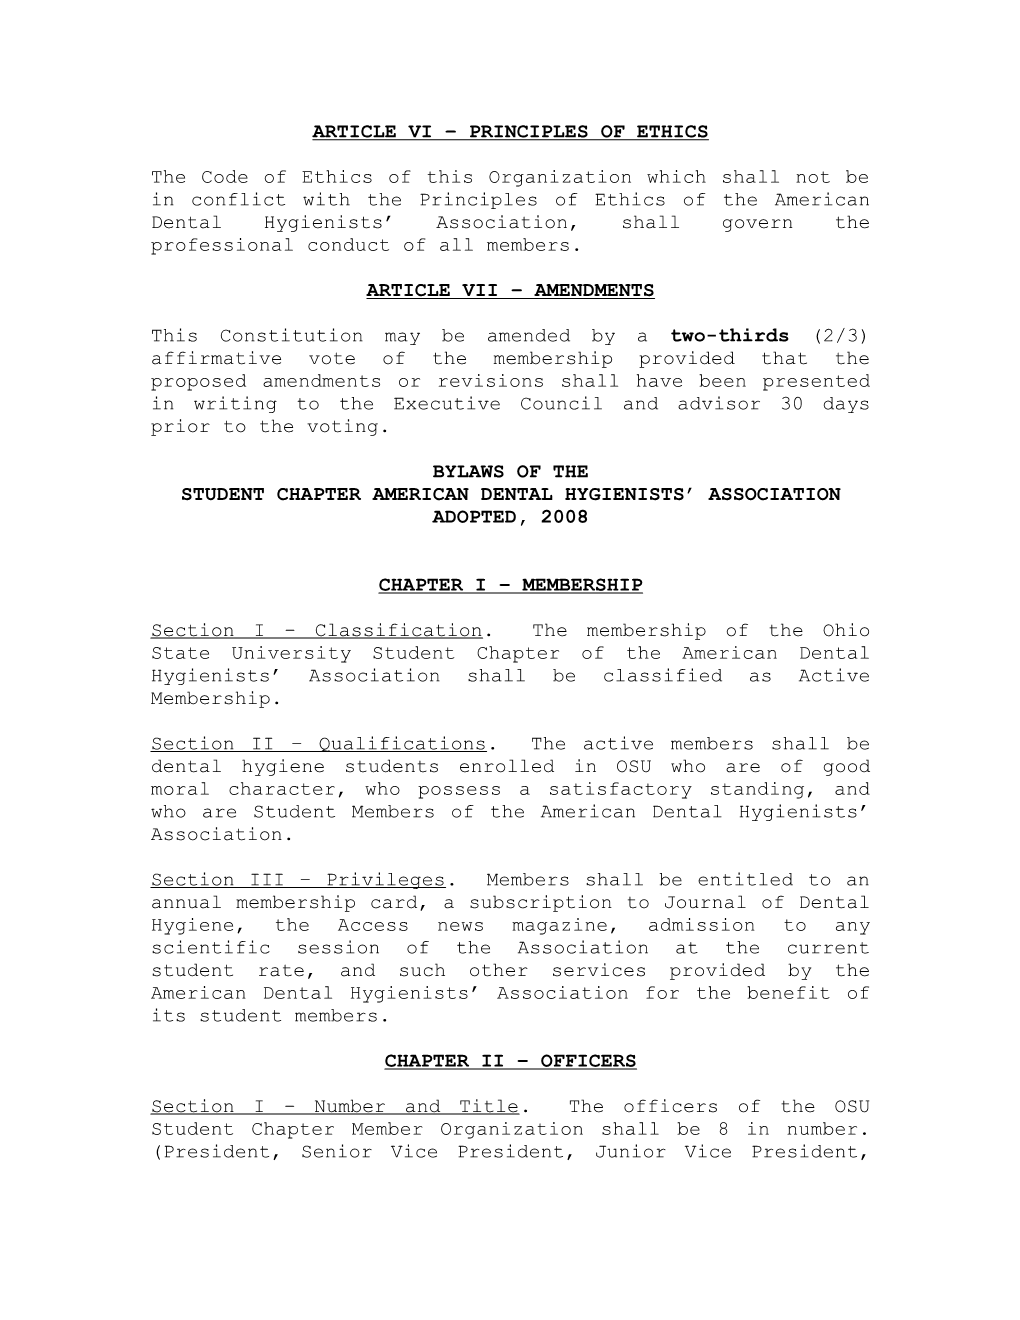 Constitution of the Ohio State University Student